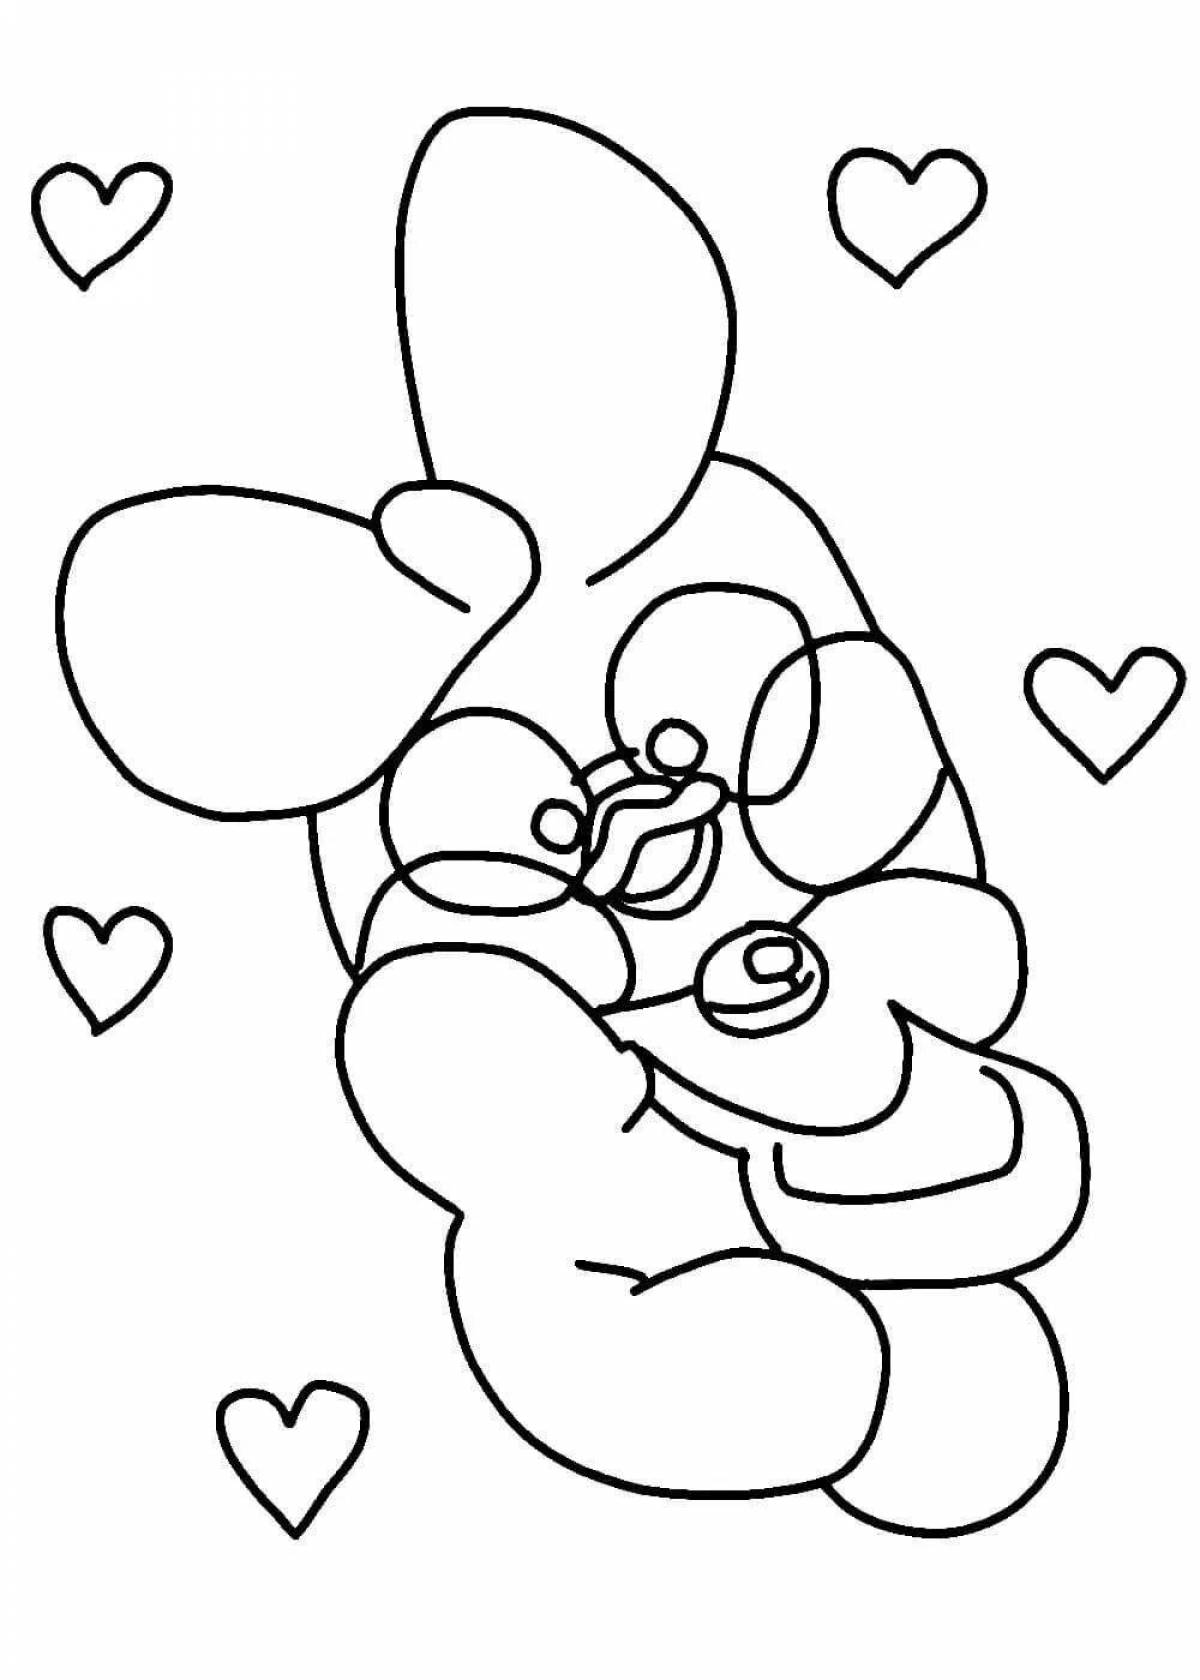 Outstanding lalafanfan big duck coloring page